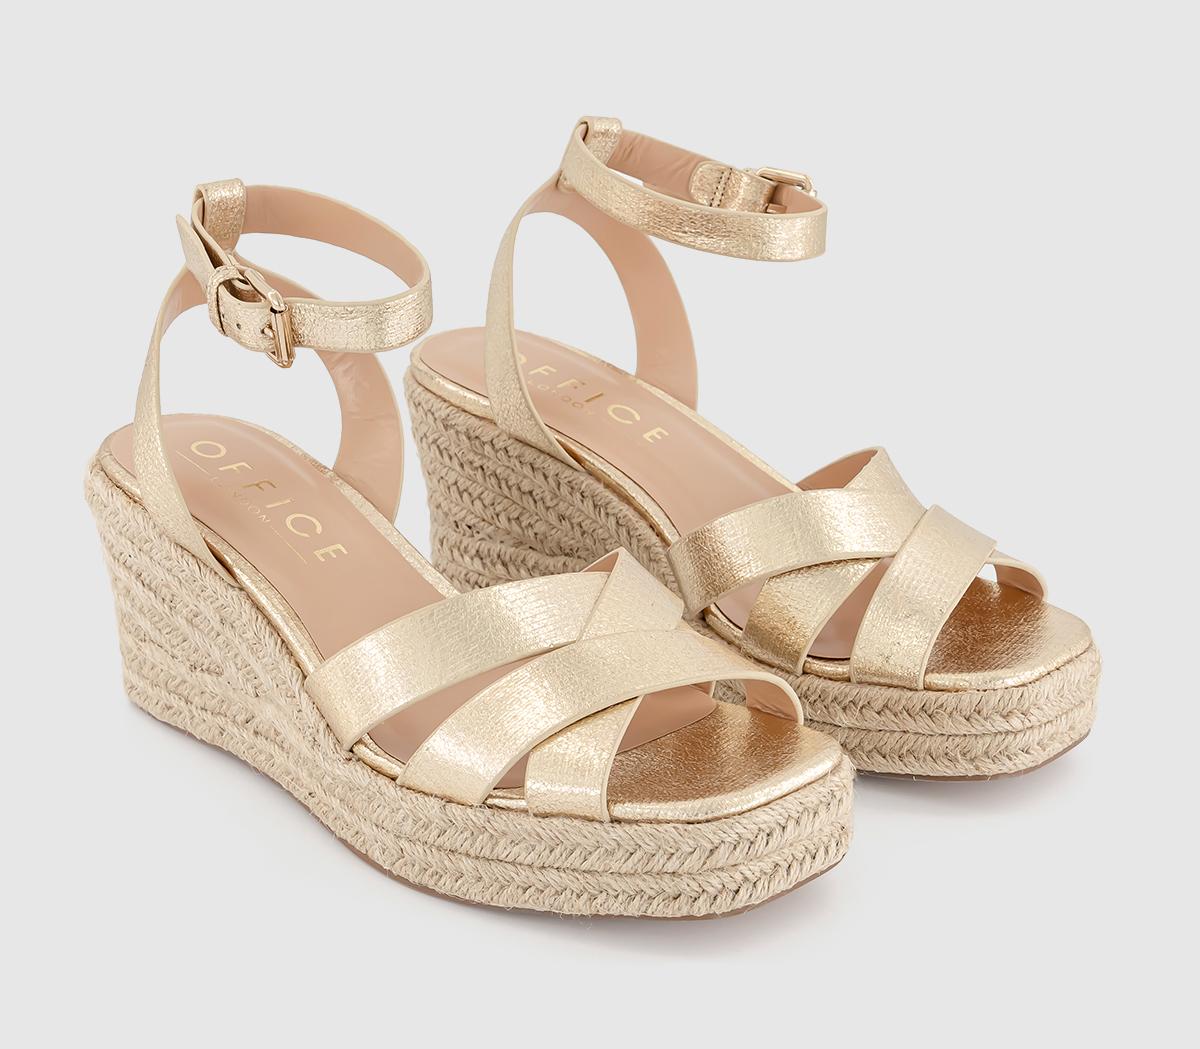 OFFICE Womens Martina Multi Strap Mid Espadrille Wedges Gold, 7